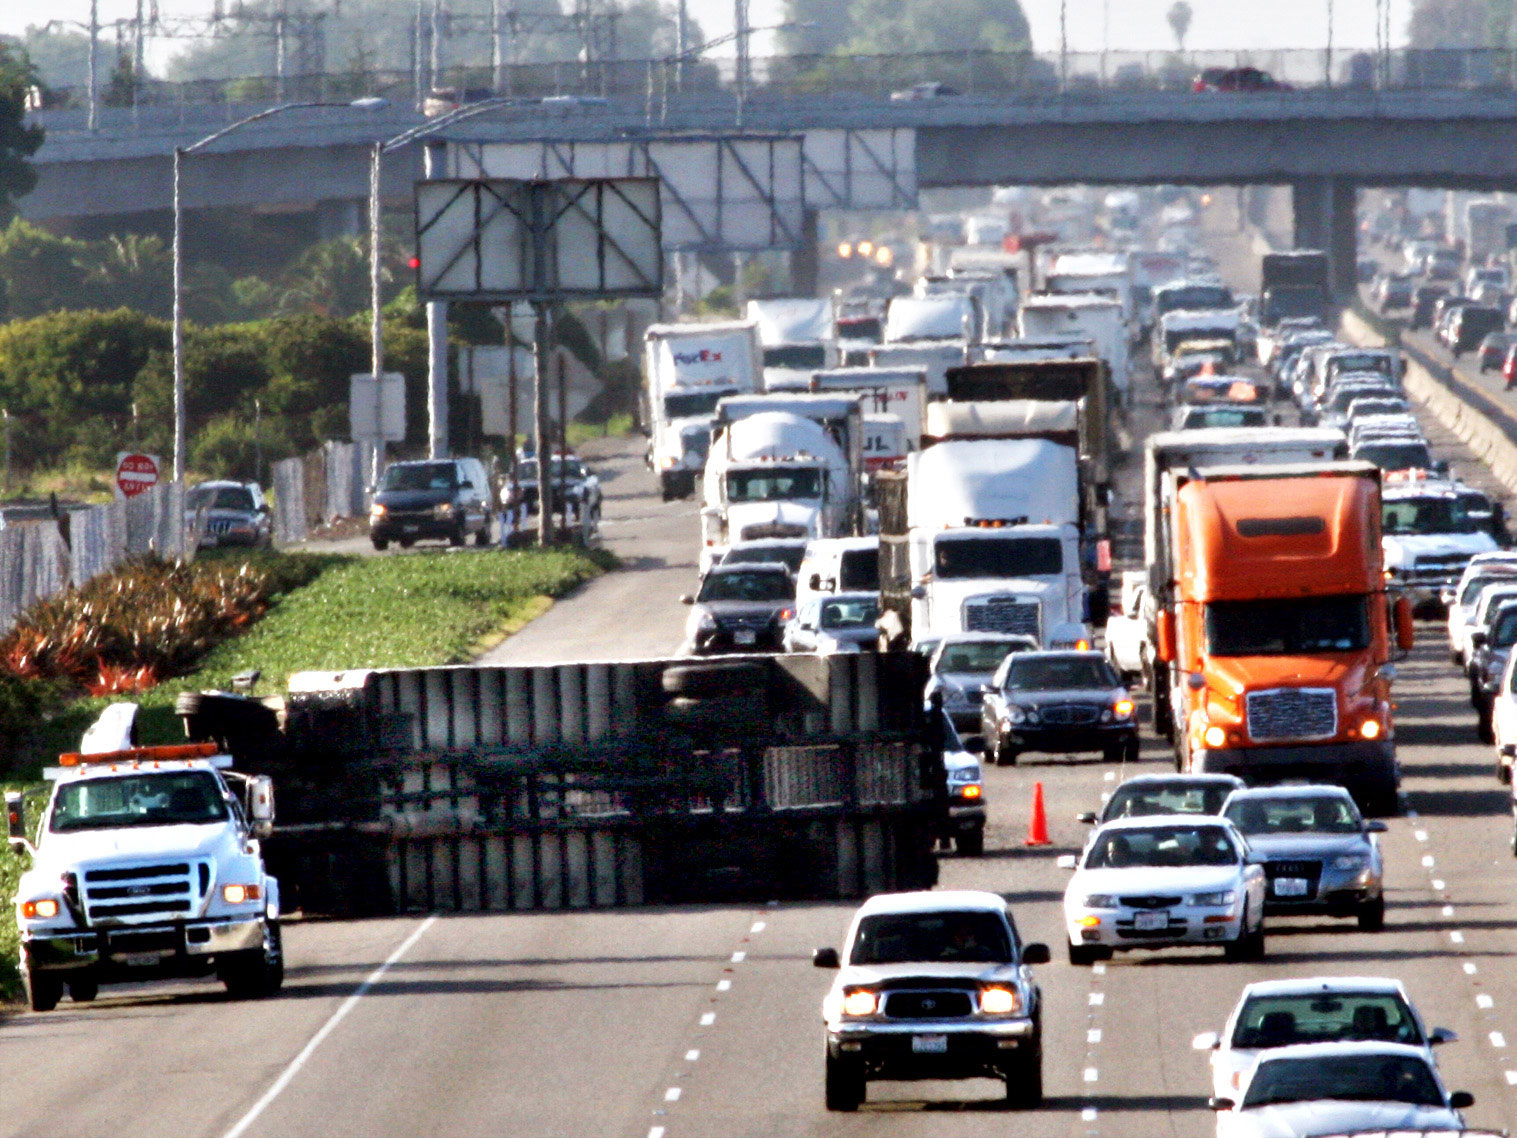 Atlanta is the fatal center of the U.S. truck rollover syndrome, but the problem is nationwide. Above, a rollover near San Francisco backs up highway traffic at rush hour for nearly 10 miles.
